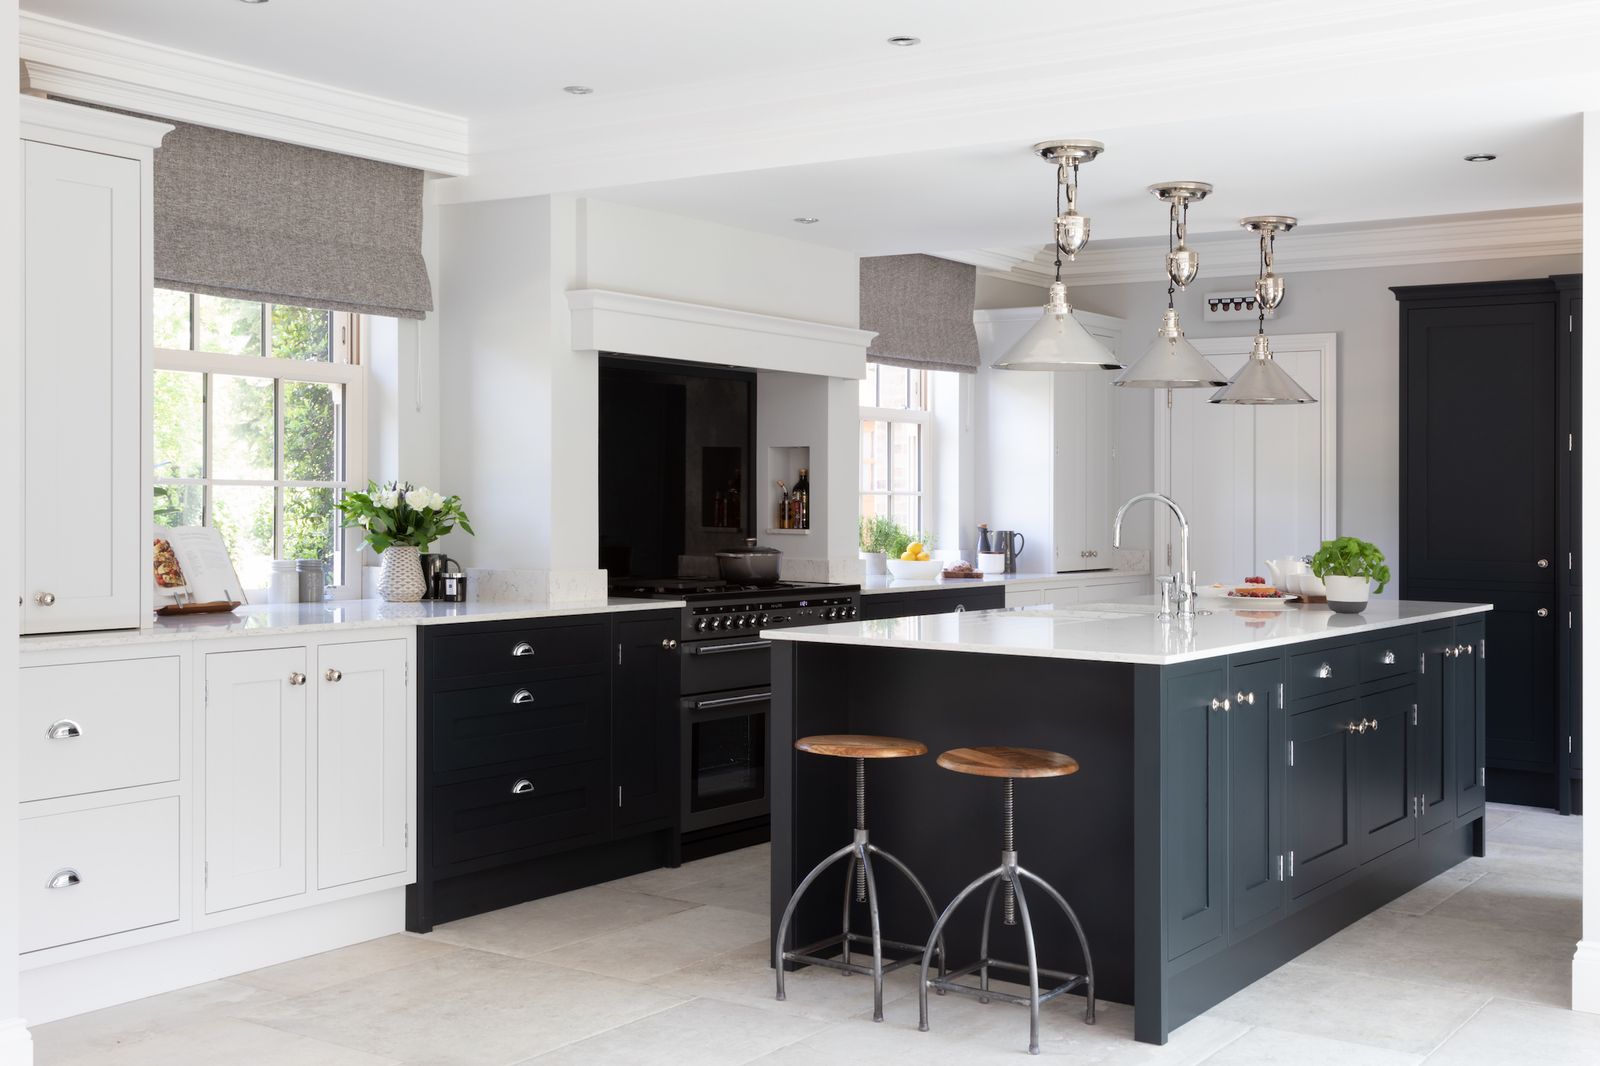 7 ways to add character to an extended kitchen